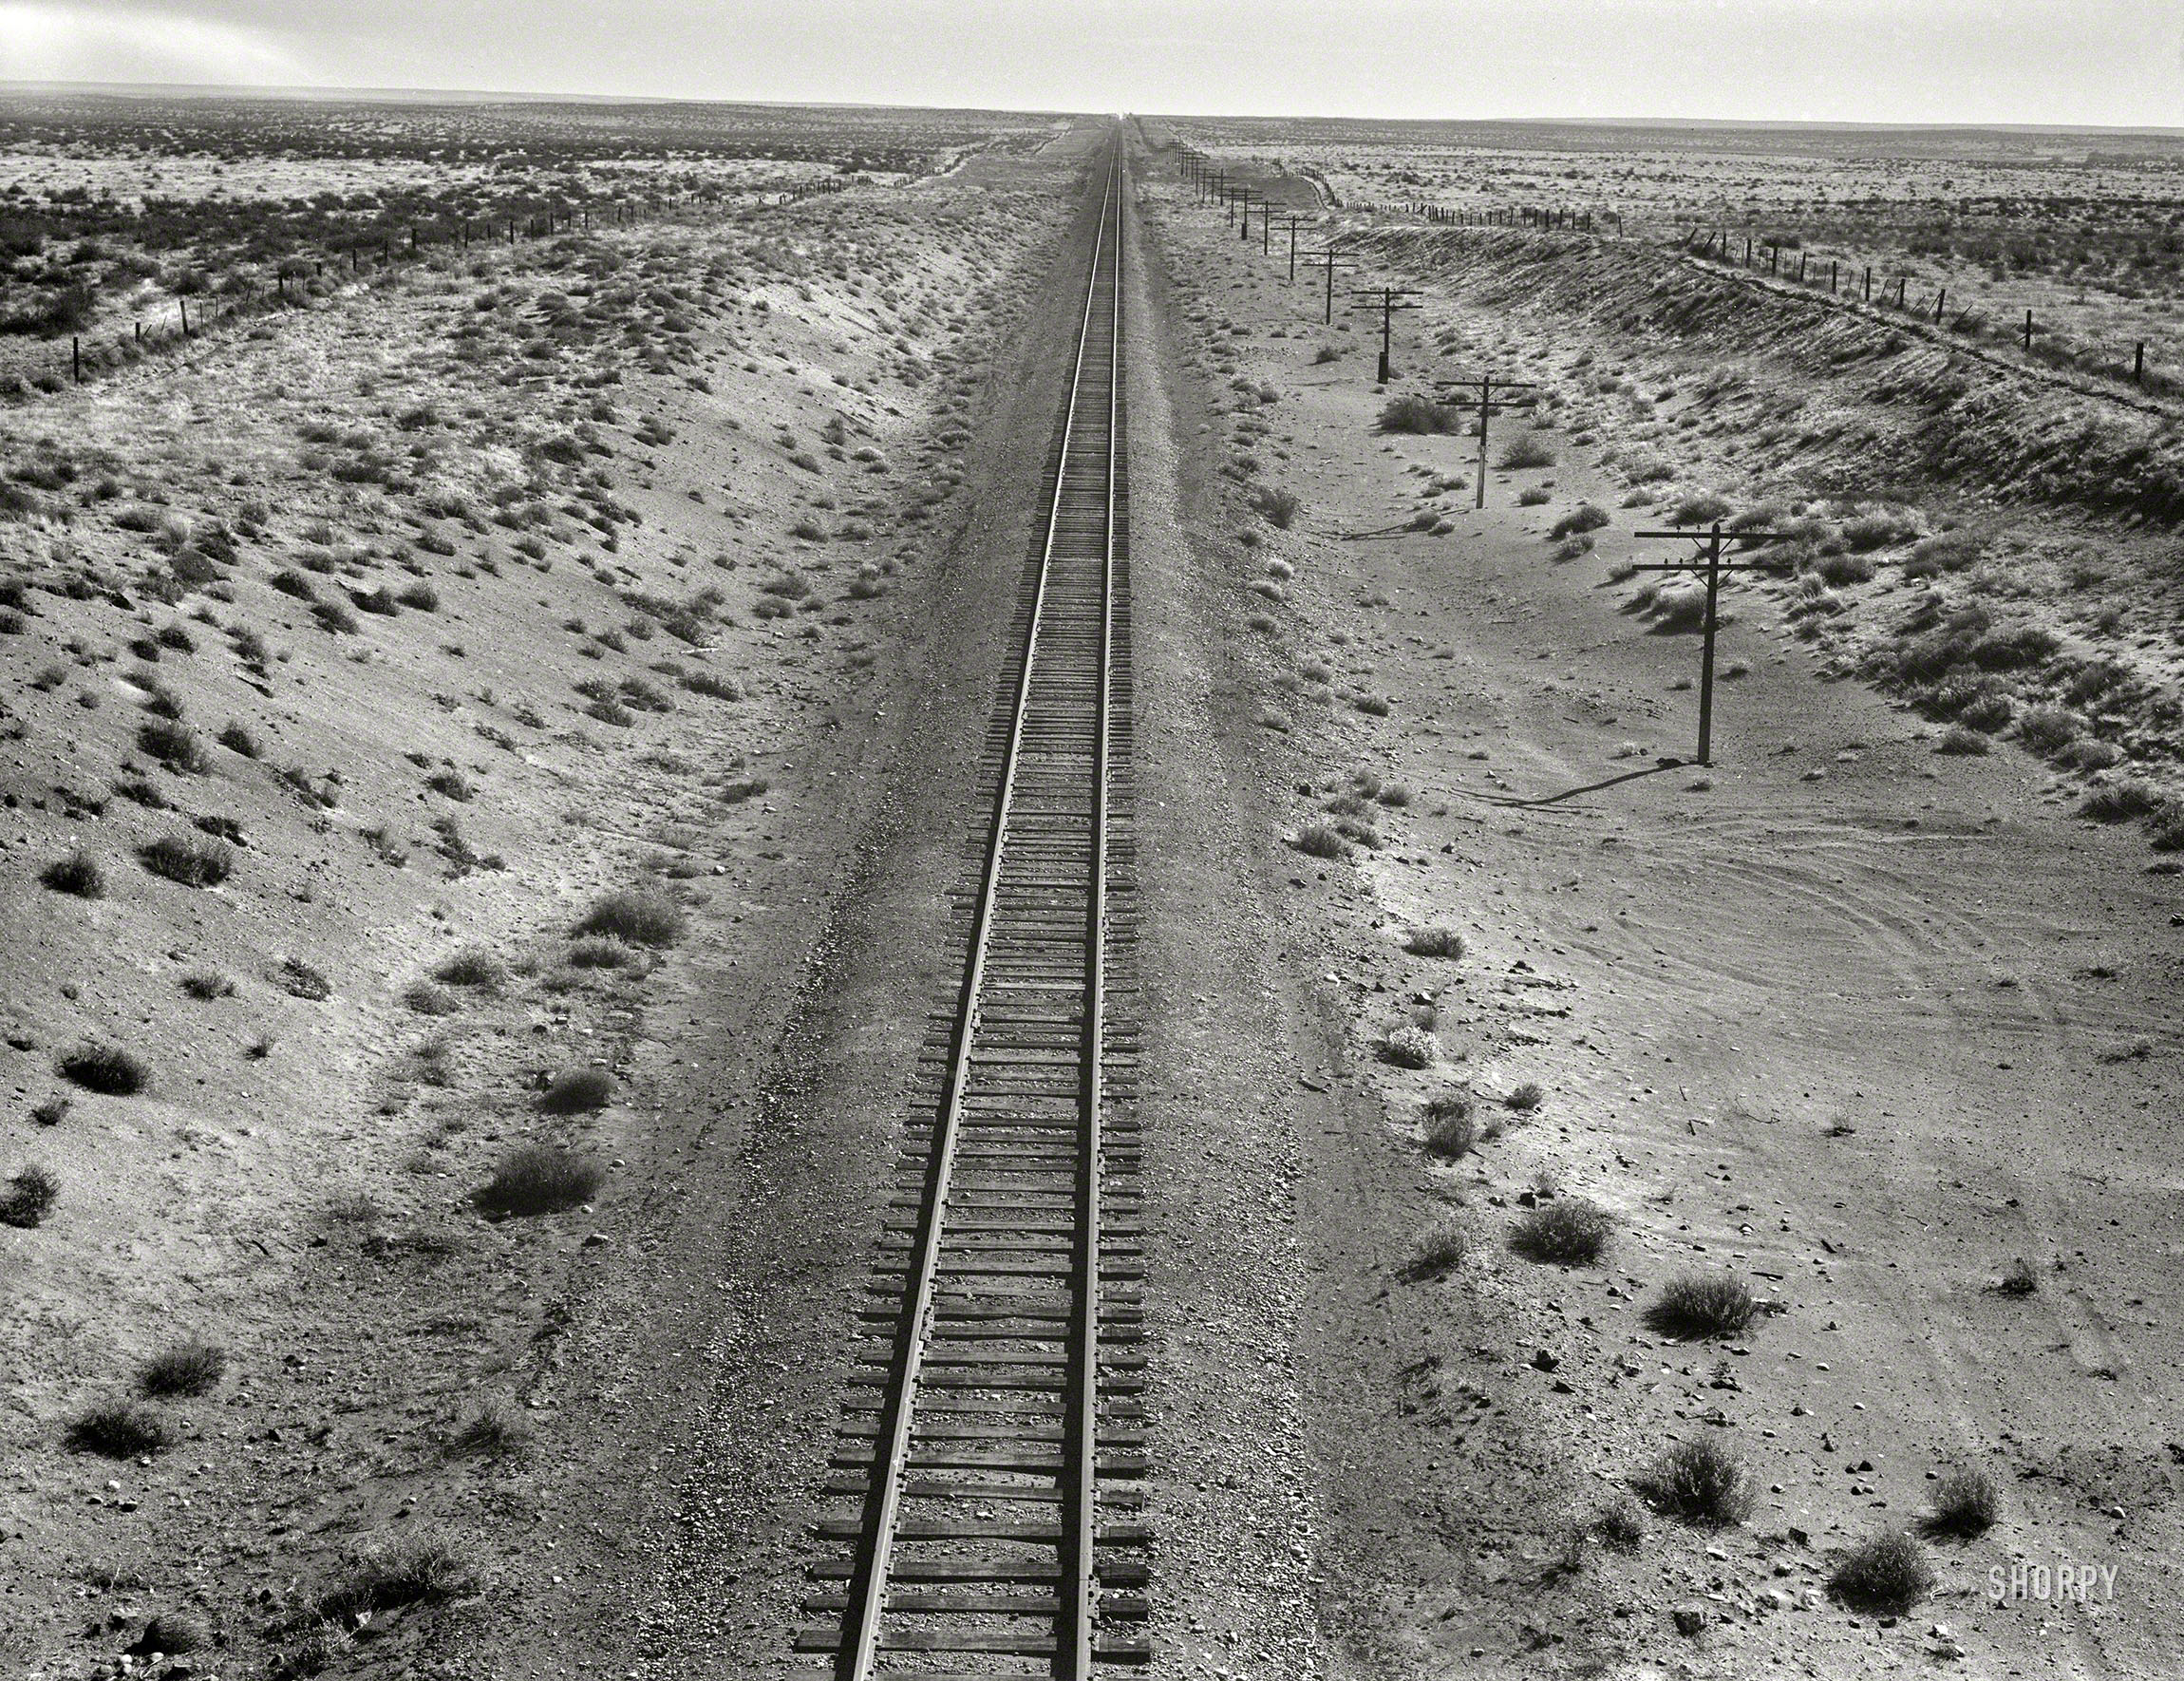 October 1939. "Western Pacific line runs through unclaimed desert of northern Oregon. Ten miles from railroad station at Irrigon. Morrow County, Oregon." Photo by Dorothea Lange for the Farm Security Administration. View full size.